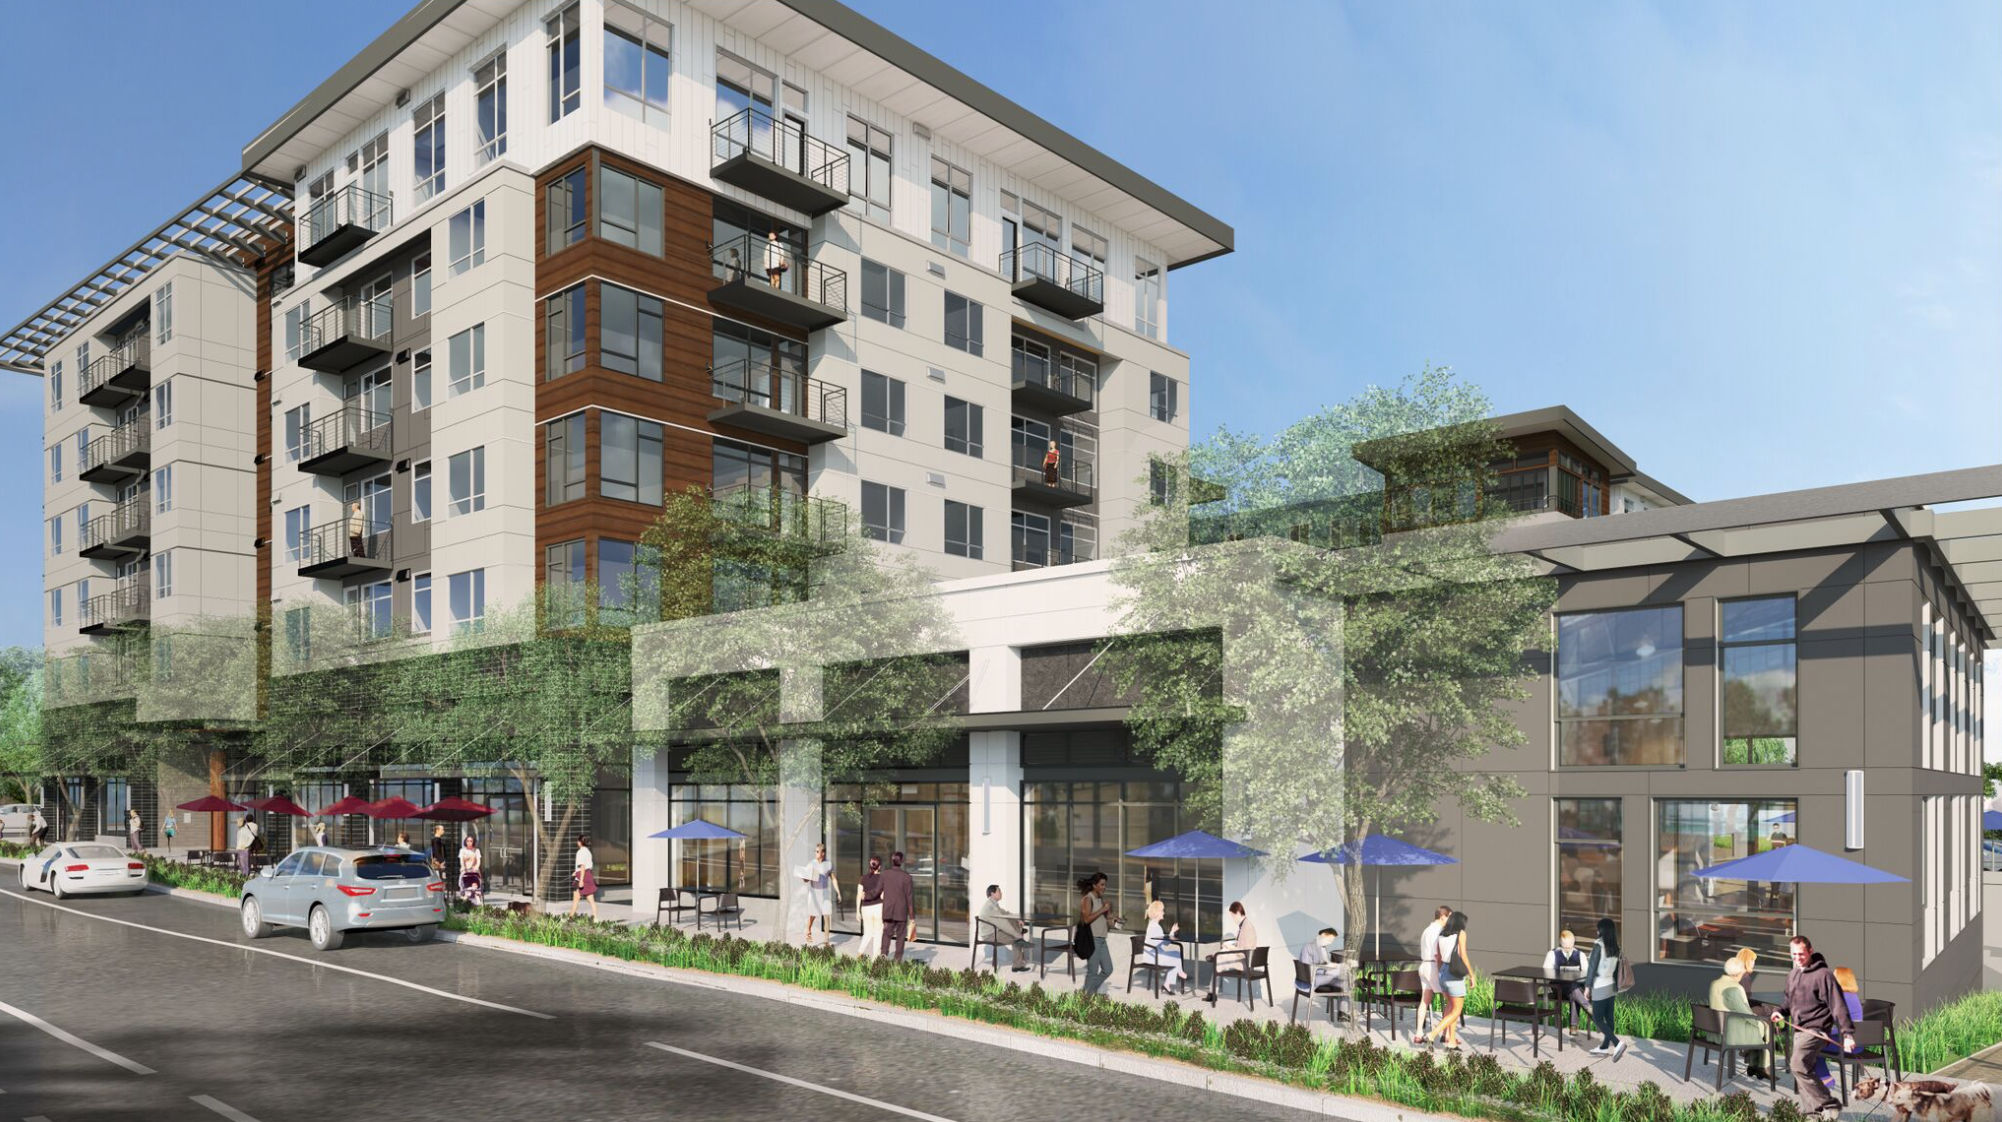 rendering of Sky Sammamish project, showing a mixed use multi-story building with sidewalk seating